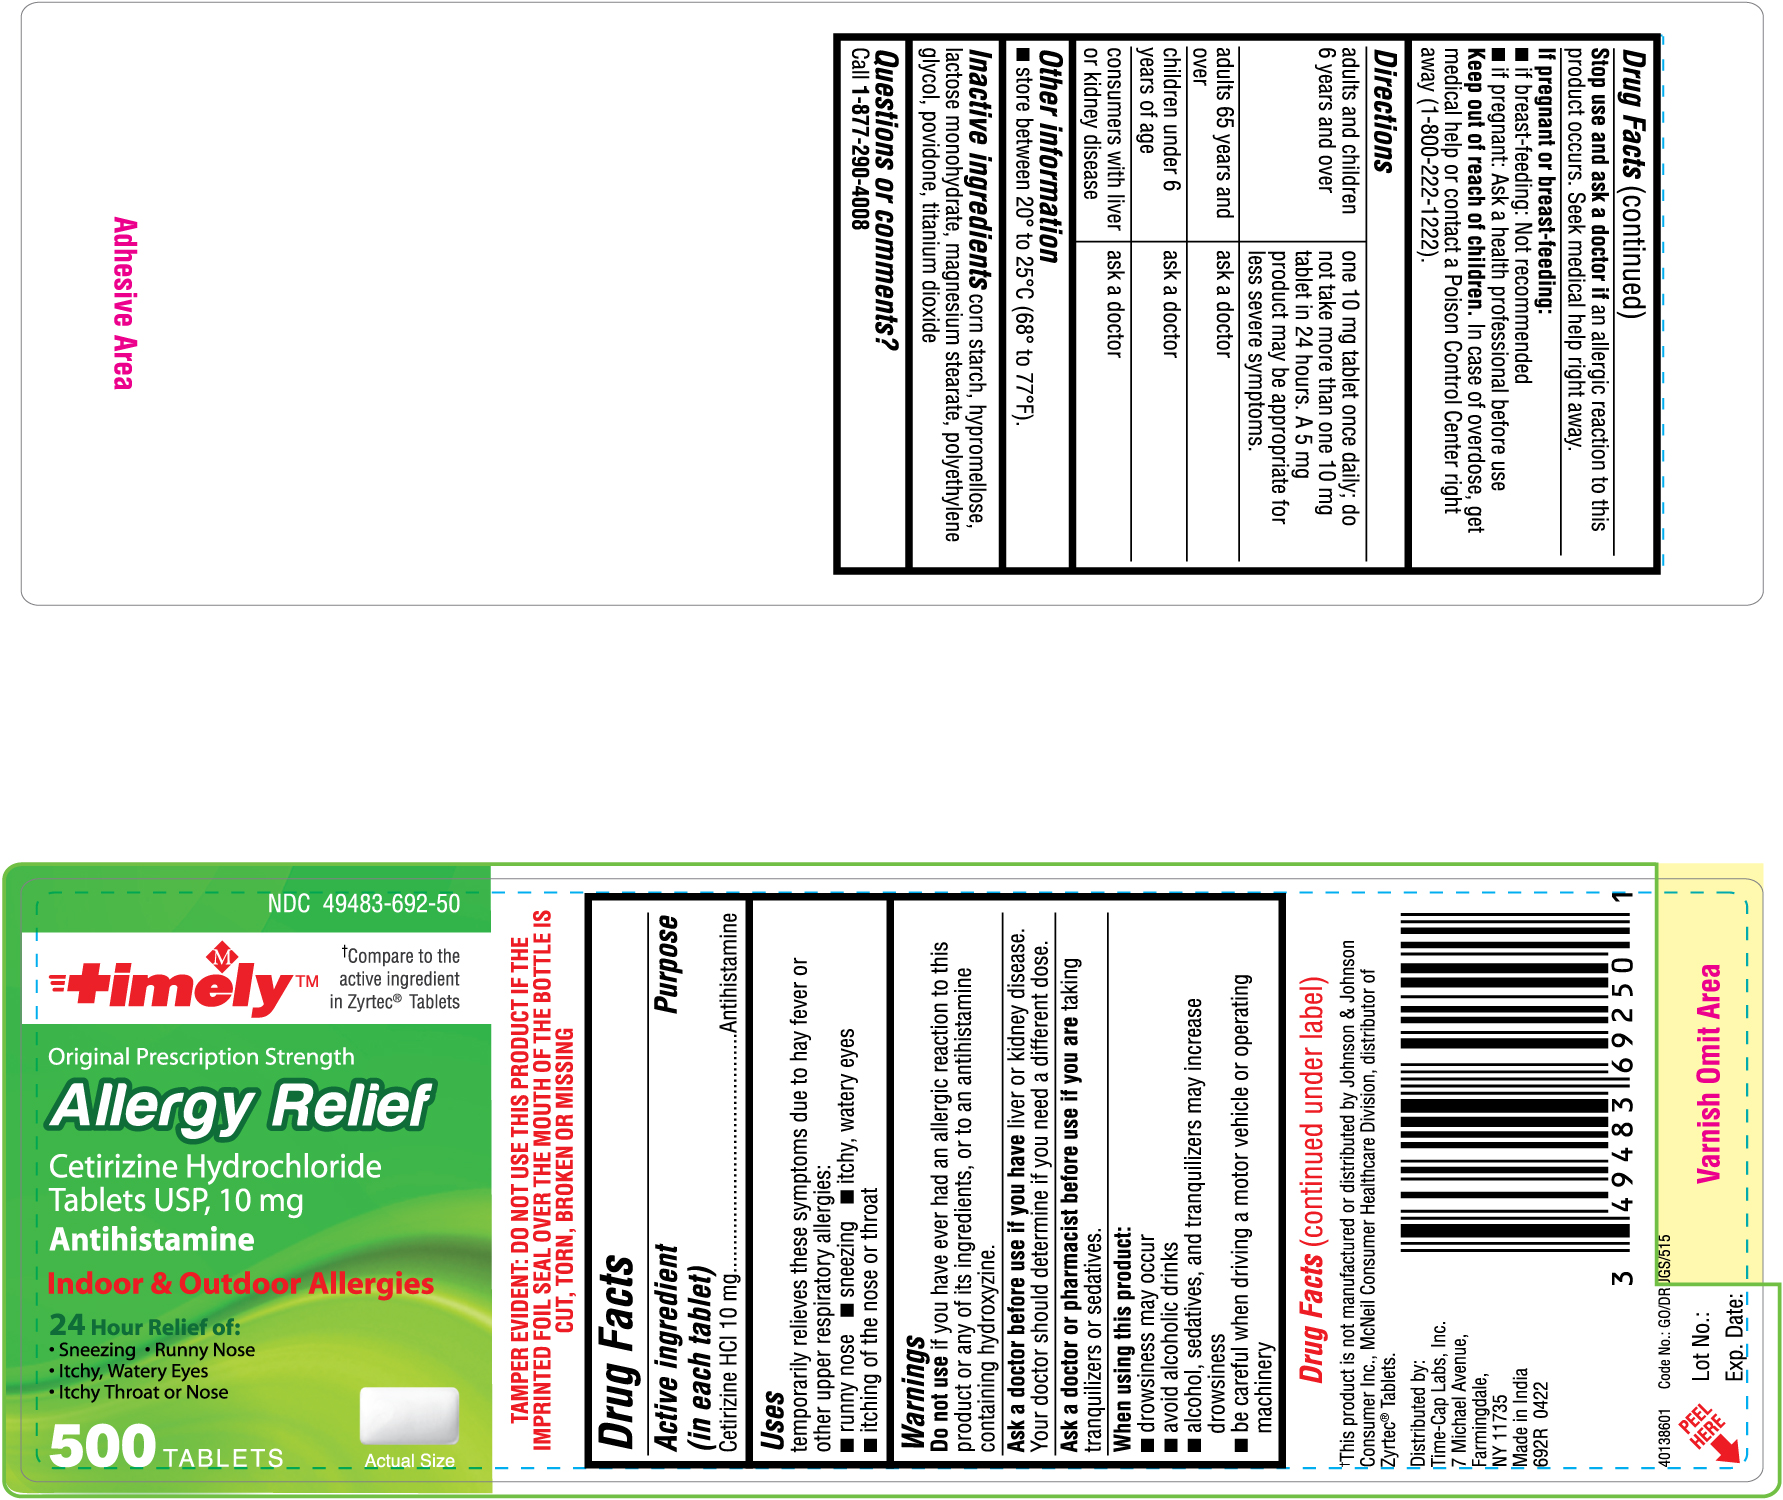 692R-timely-cetirizine10mg-500ct-label